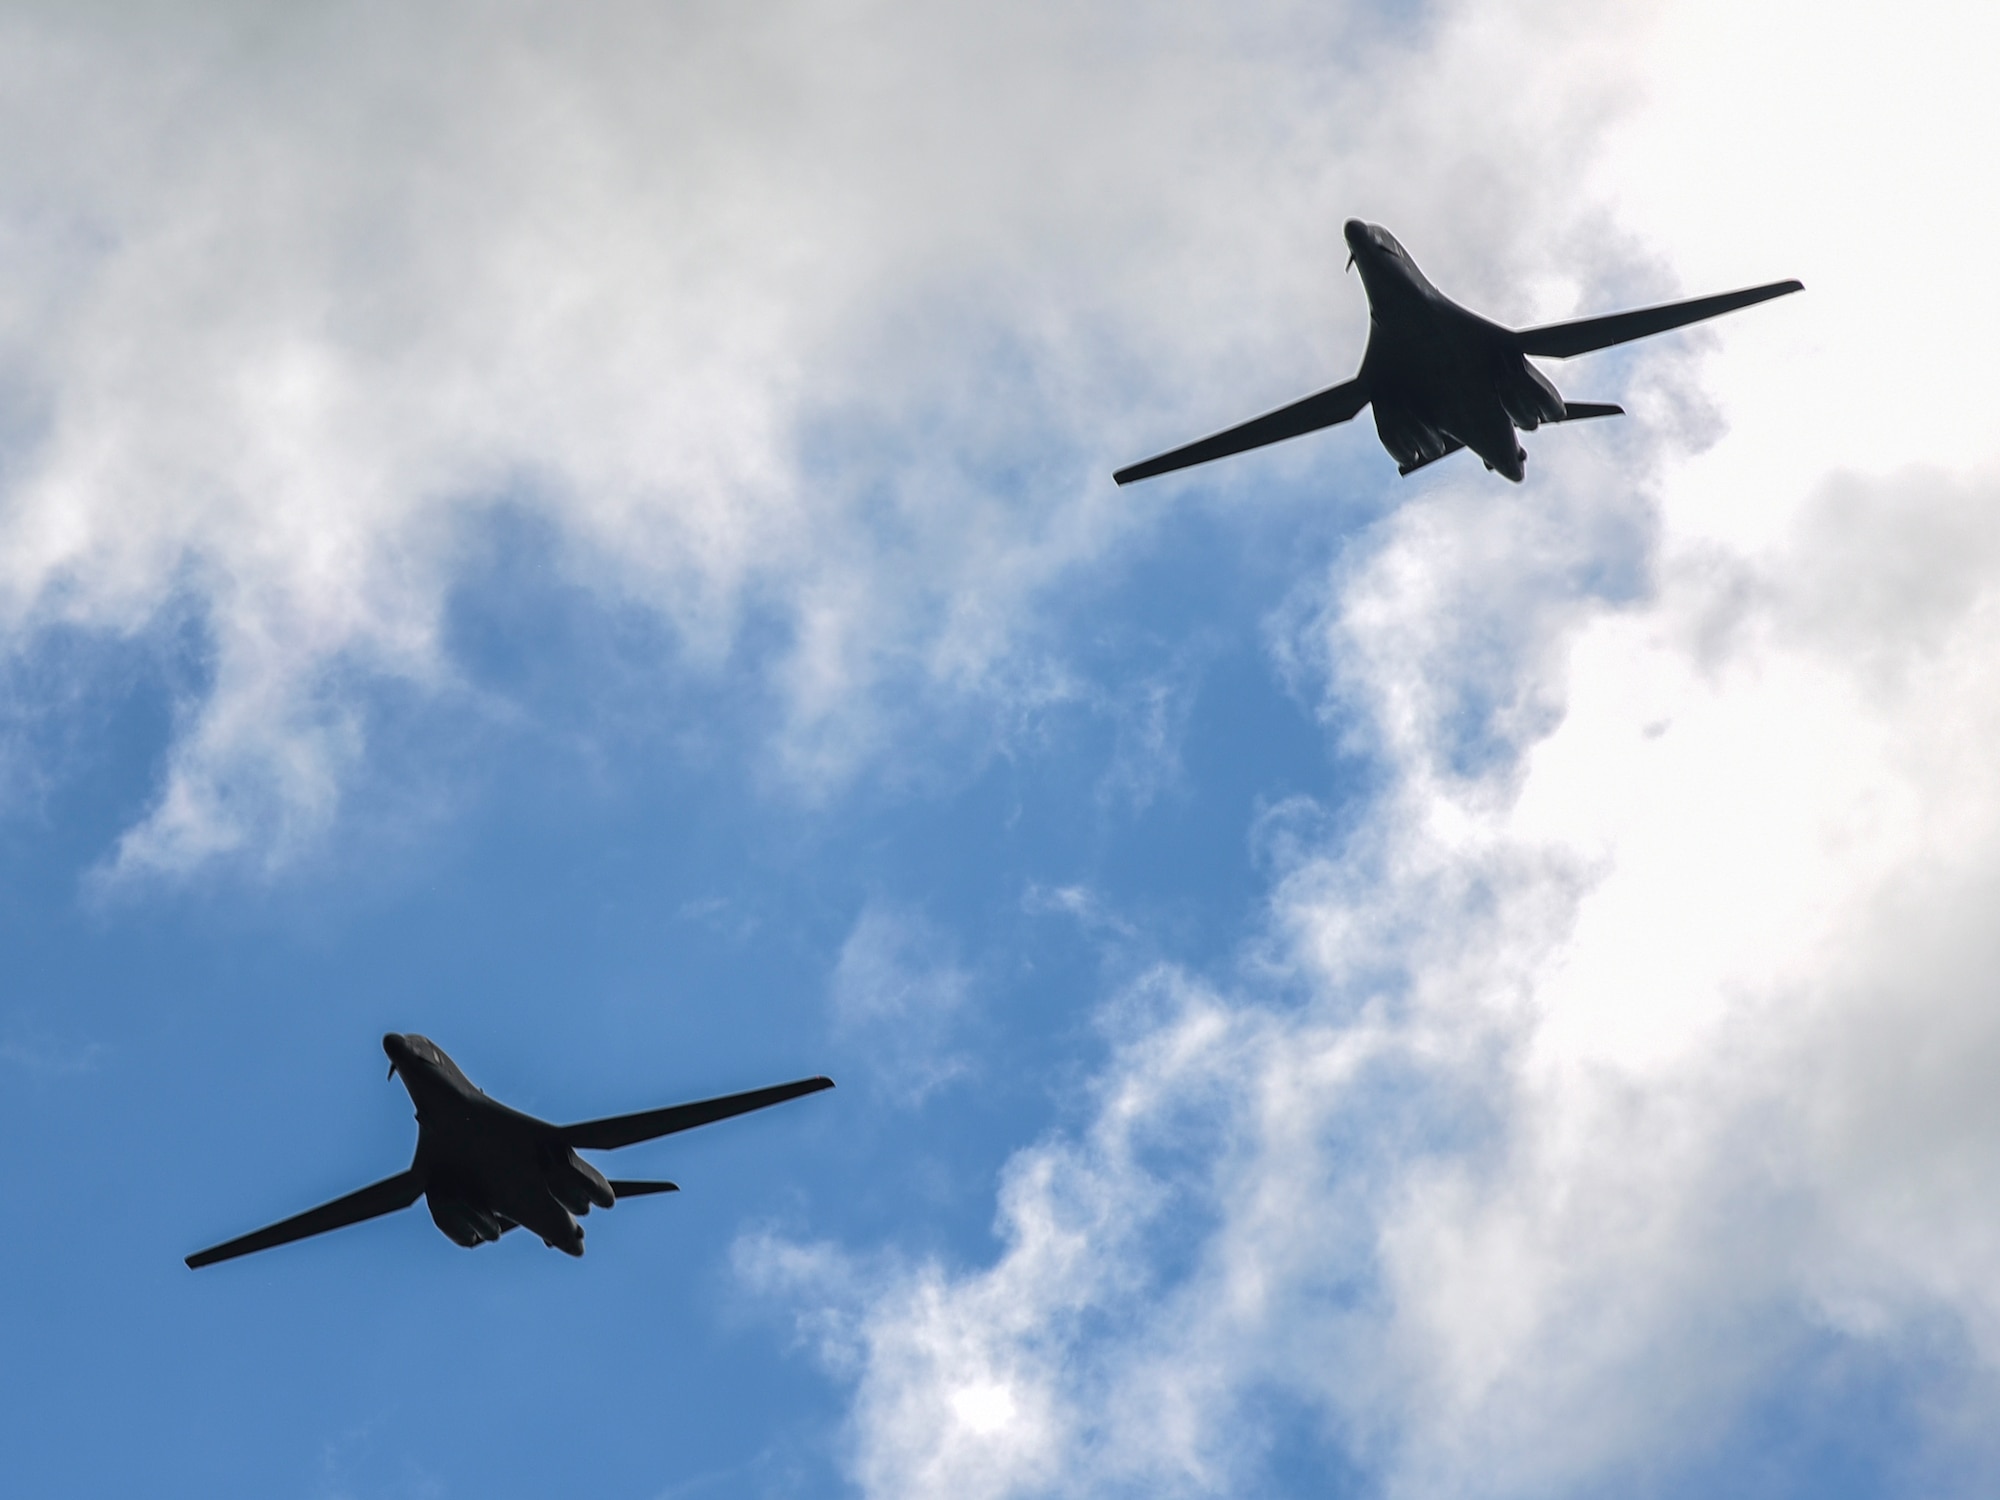 Two B-1B Lancers from Ellsworth Air Force Base, S.D., fly over Royal Air Force Fairford, U.K., June 8, 2017. Aircrew from the 37th Bomb Squadron are participating in bomber assurance and deterrence missions in the European theatre that provide bomber crews opportunities to train with allies and partners in joint and multinational exercises such as BALTOPS and Saber Strike. (U.S. Air Force photo by Airman 1st Class Randahl J. Jenson)